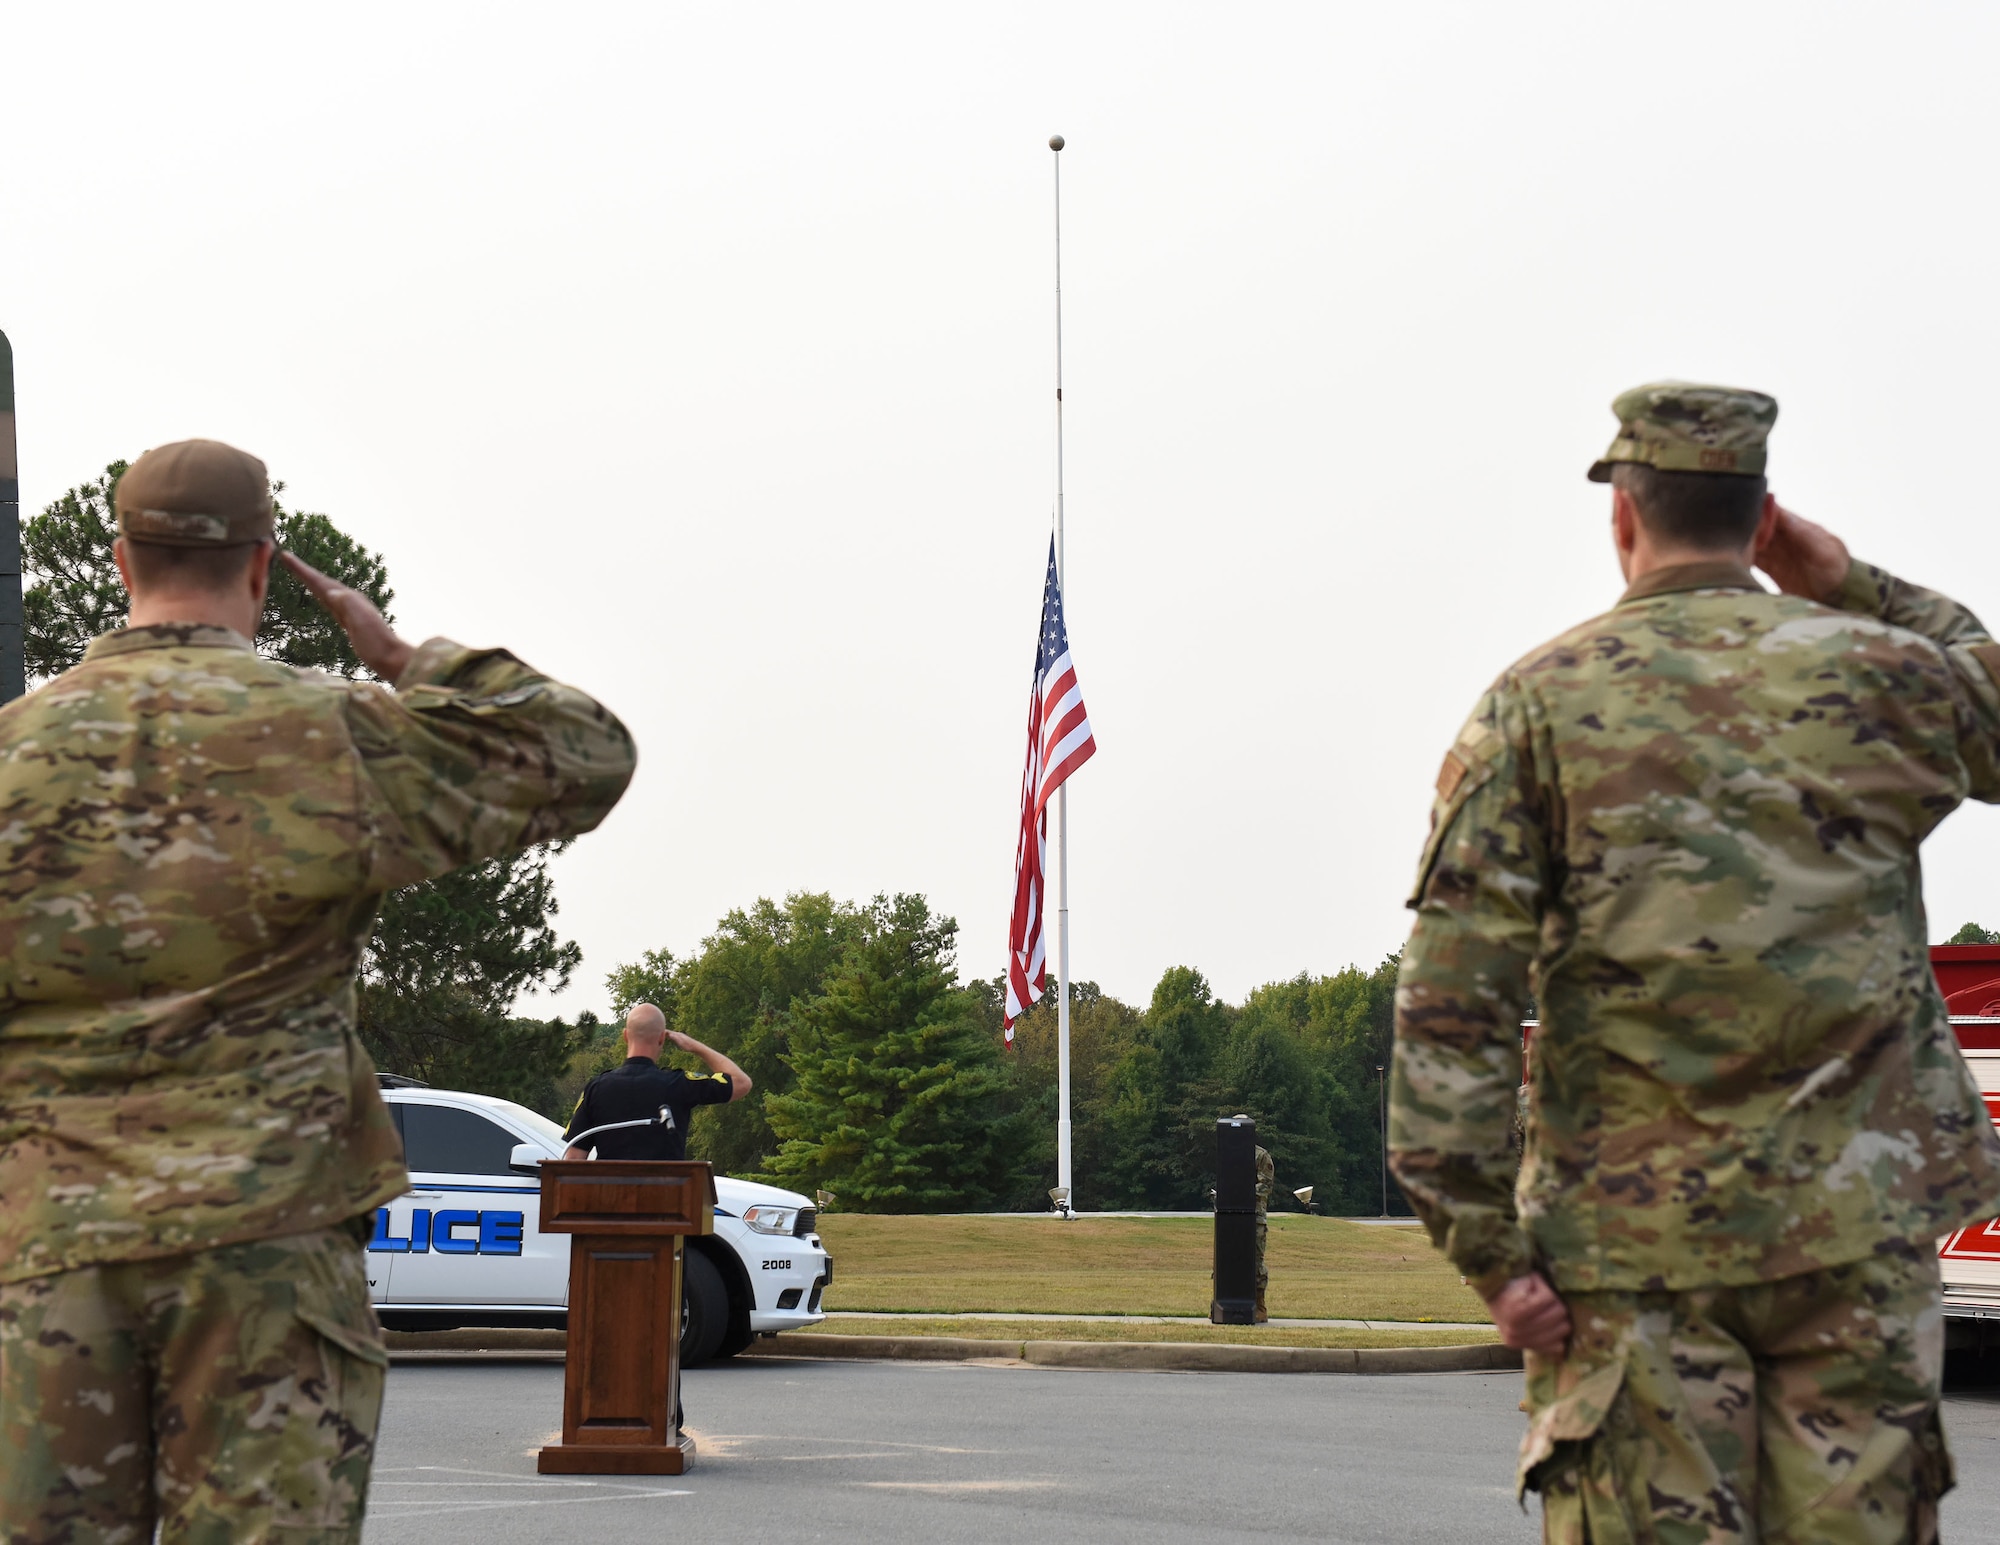 The 189th Airlift Wing, Cabot Police Department and Cabot Fire Department participated in a 9/11 Remembrance Ceremony commemorating the 20-year anniversary of those who perished in the 9/11 attacks.